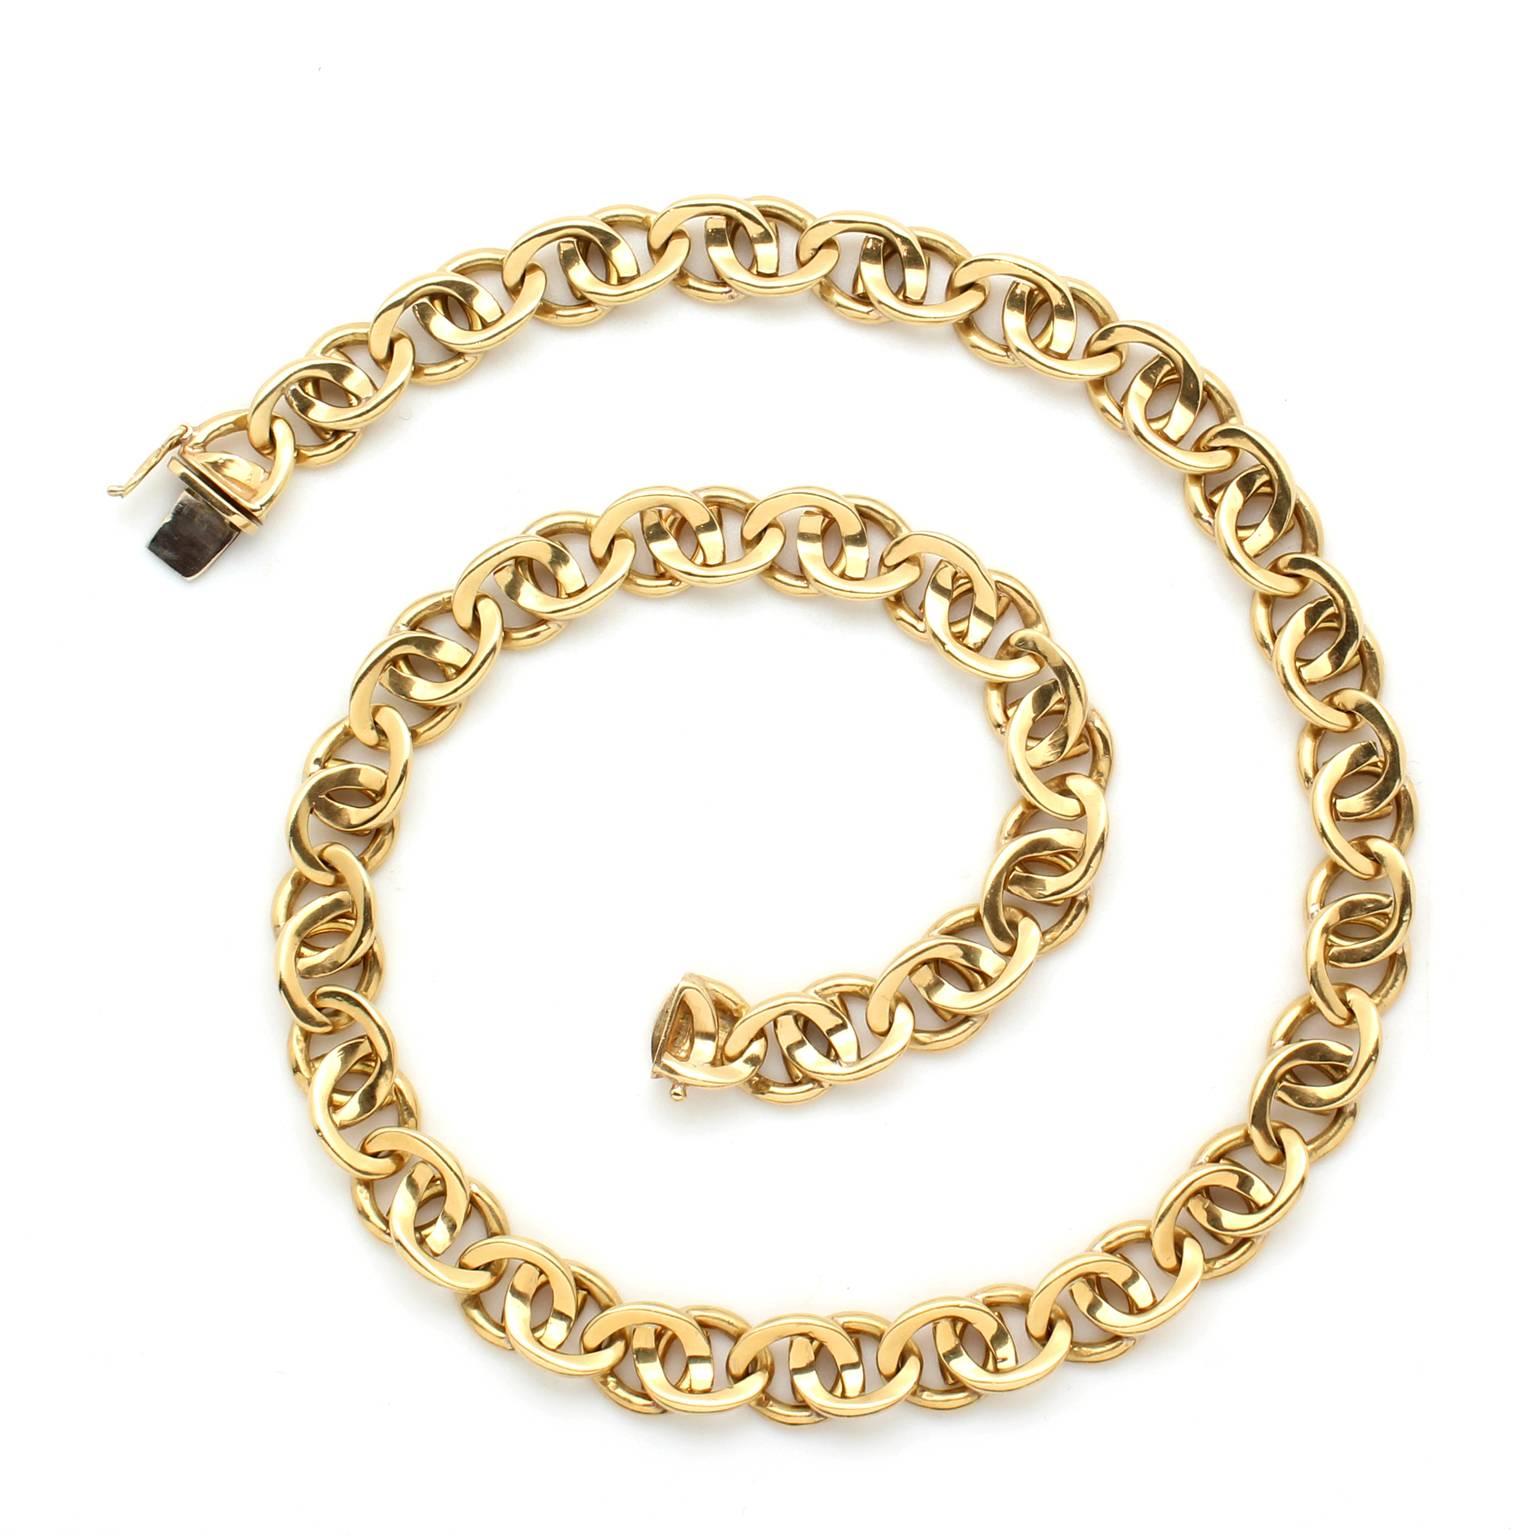 This vintage chain necklace, circa 1980, is made of 18k yellow gold. The necklace has a great heft, the total weight is 3.7 Troy ounces. The links measure 10mm in width. When worn, the necklace is 17.75